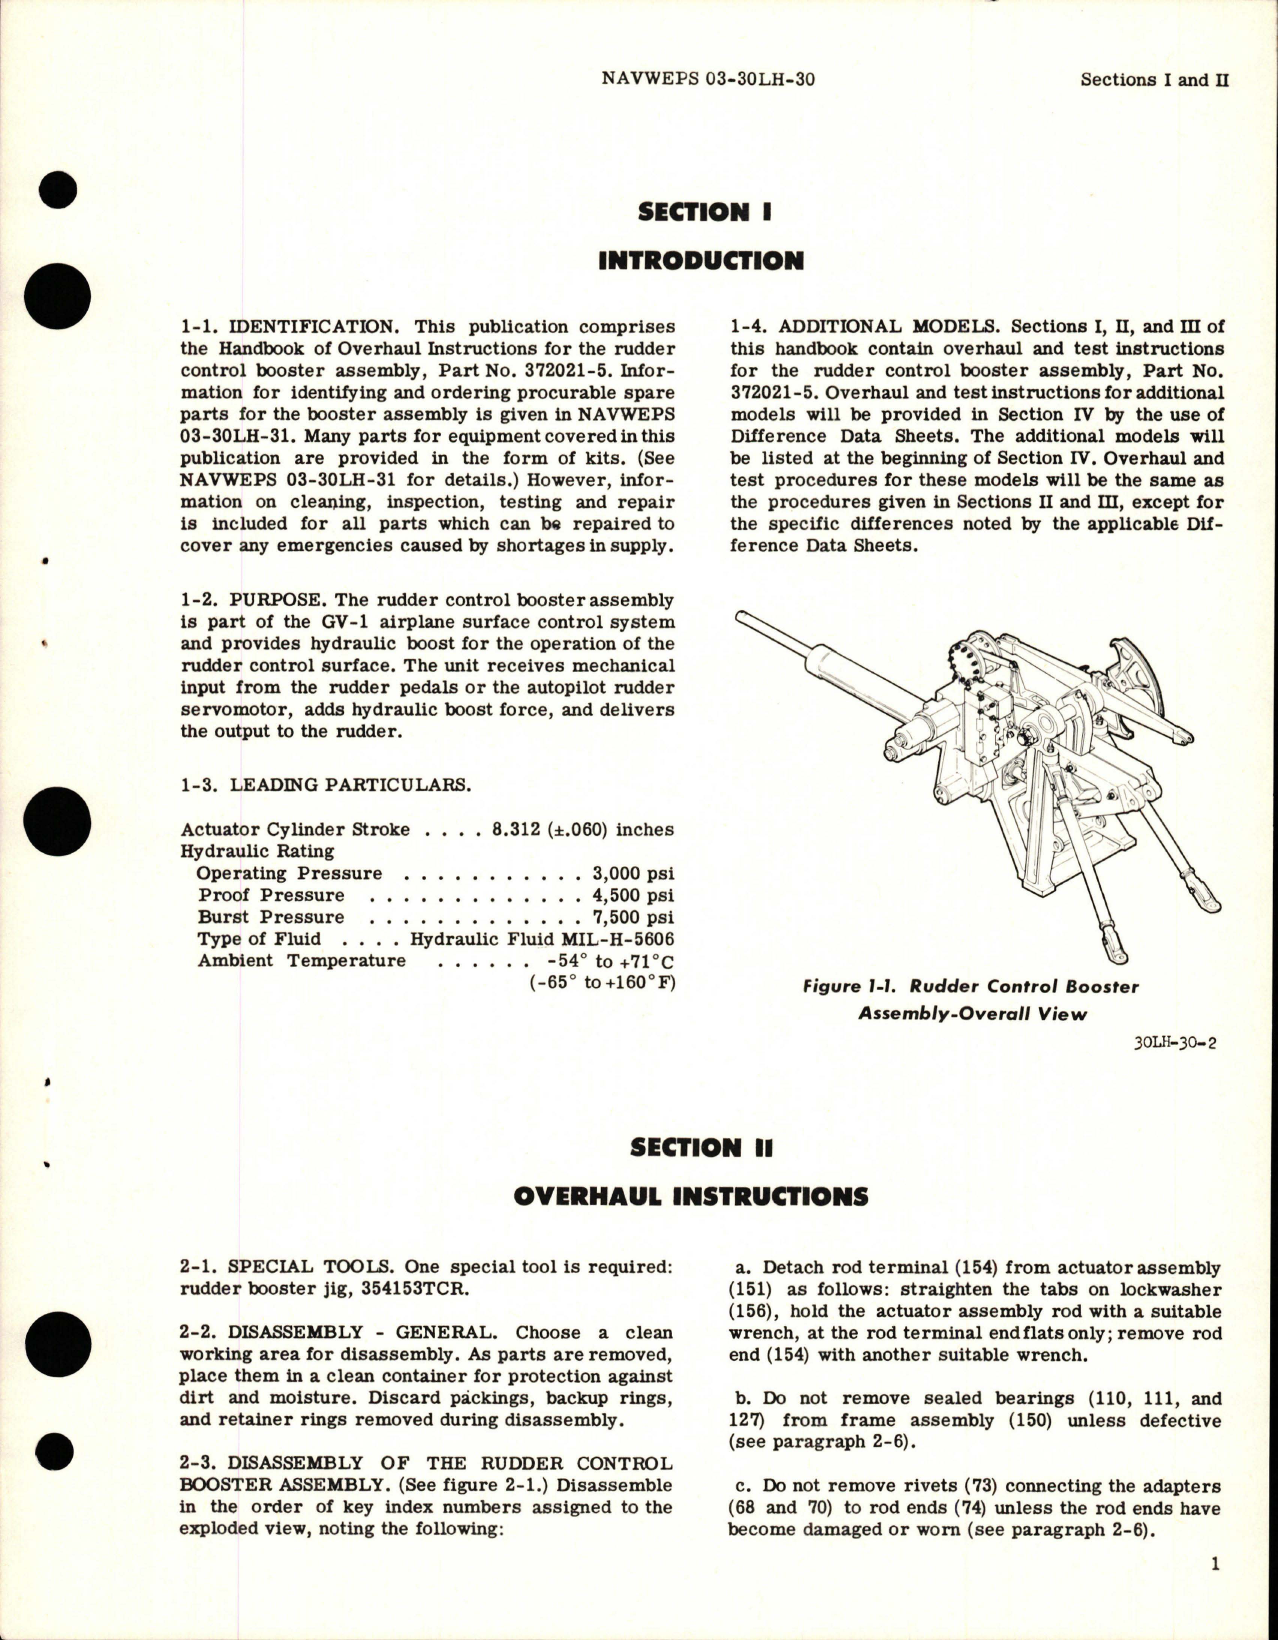 Sample page 5 from AirCorps Library document: Overhaul Instructions for Rudder Control Booster Assembly - Part 372021-5 